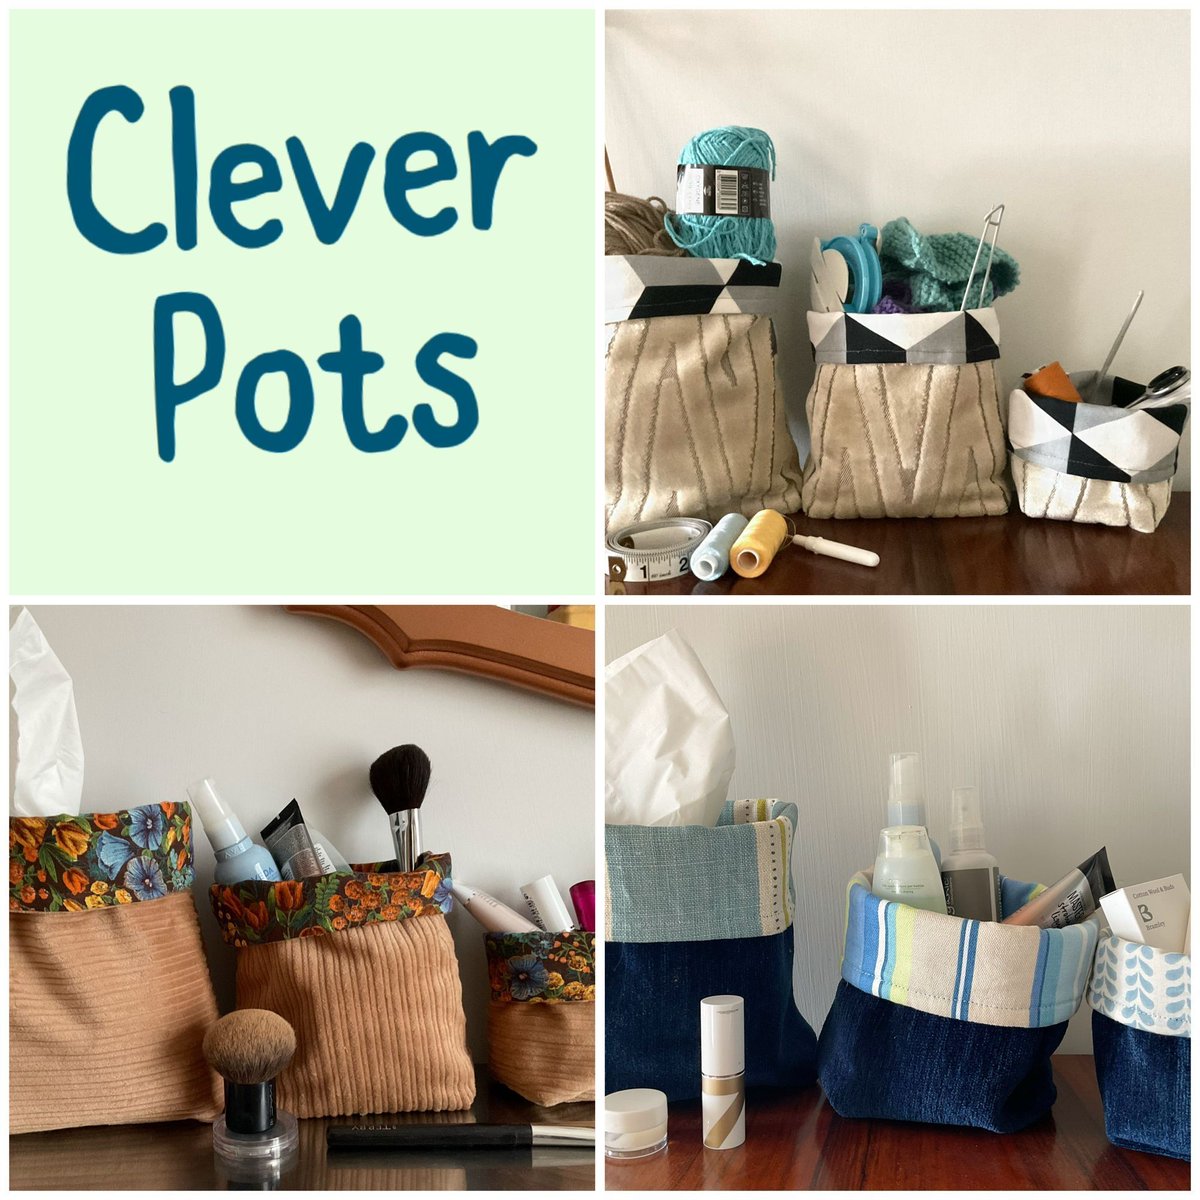 My Clever Pots - the perfect and pretty storage option. Ideal for cosmetics, craft zone, nursery or pet products tidying. Made from recycled upholstery fabric offcuts, so they are eco friendly too. #UKGiftAM #MHHSBD #shopindie buff.ly/2F1nKi1